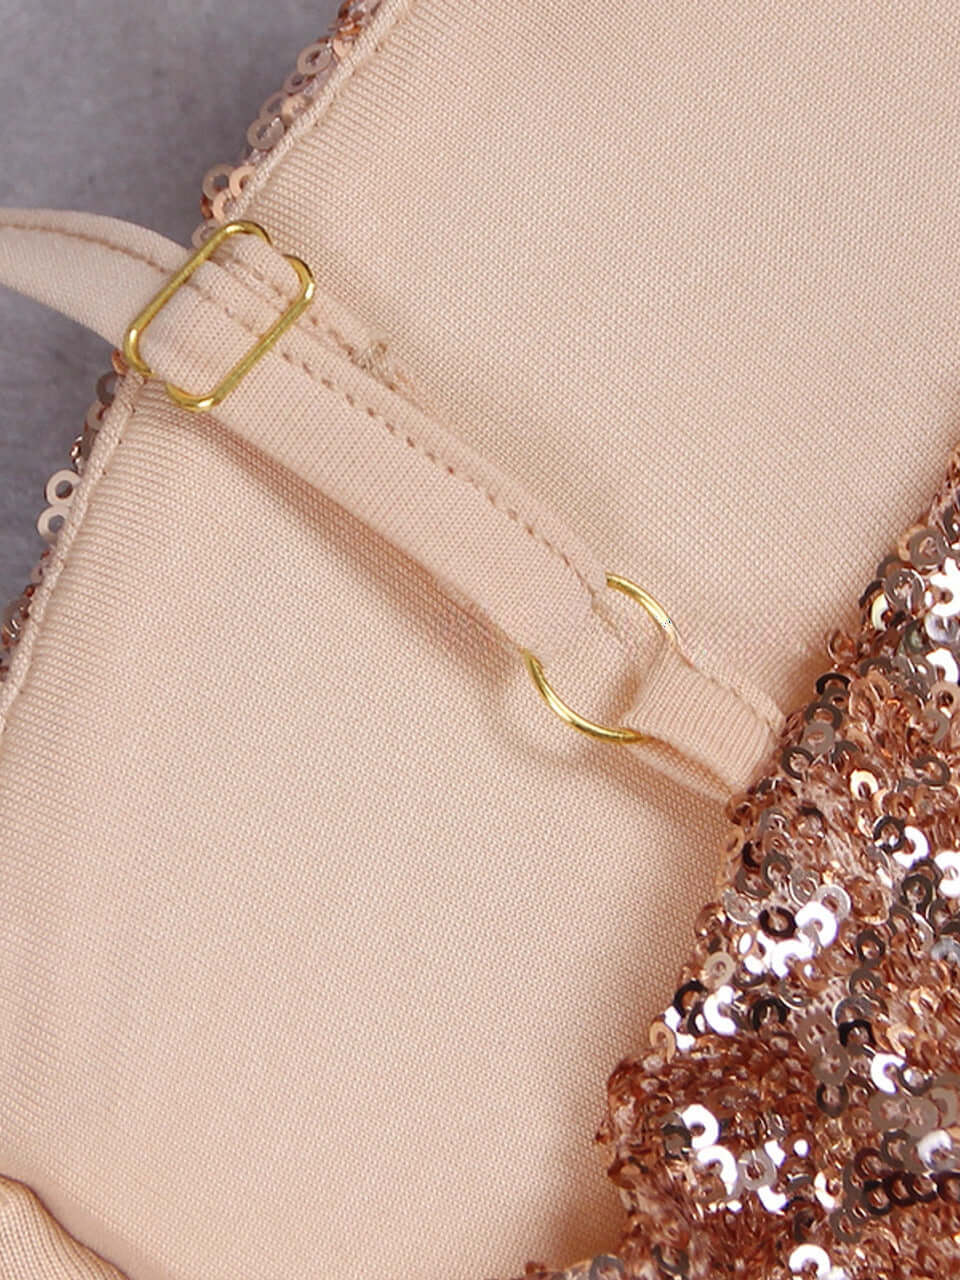 Stunning golden jumpsuit with spaghetti straps, adorned with sequins, and featuring a coordinating belt for added glamour.